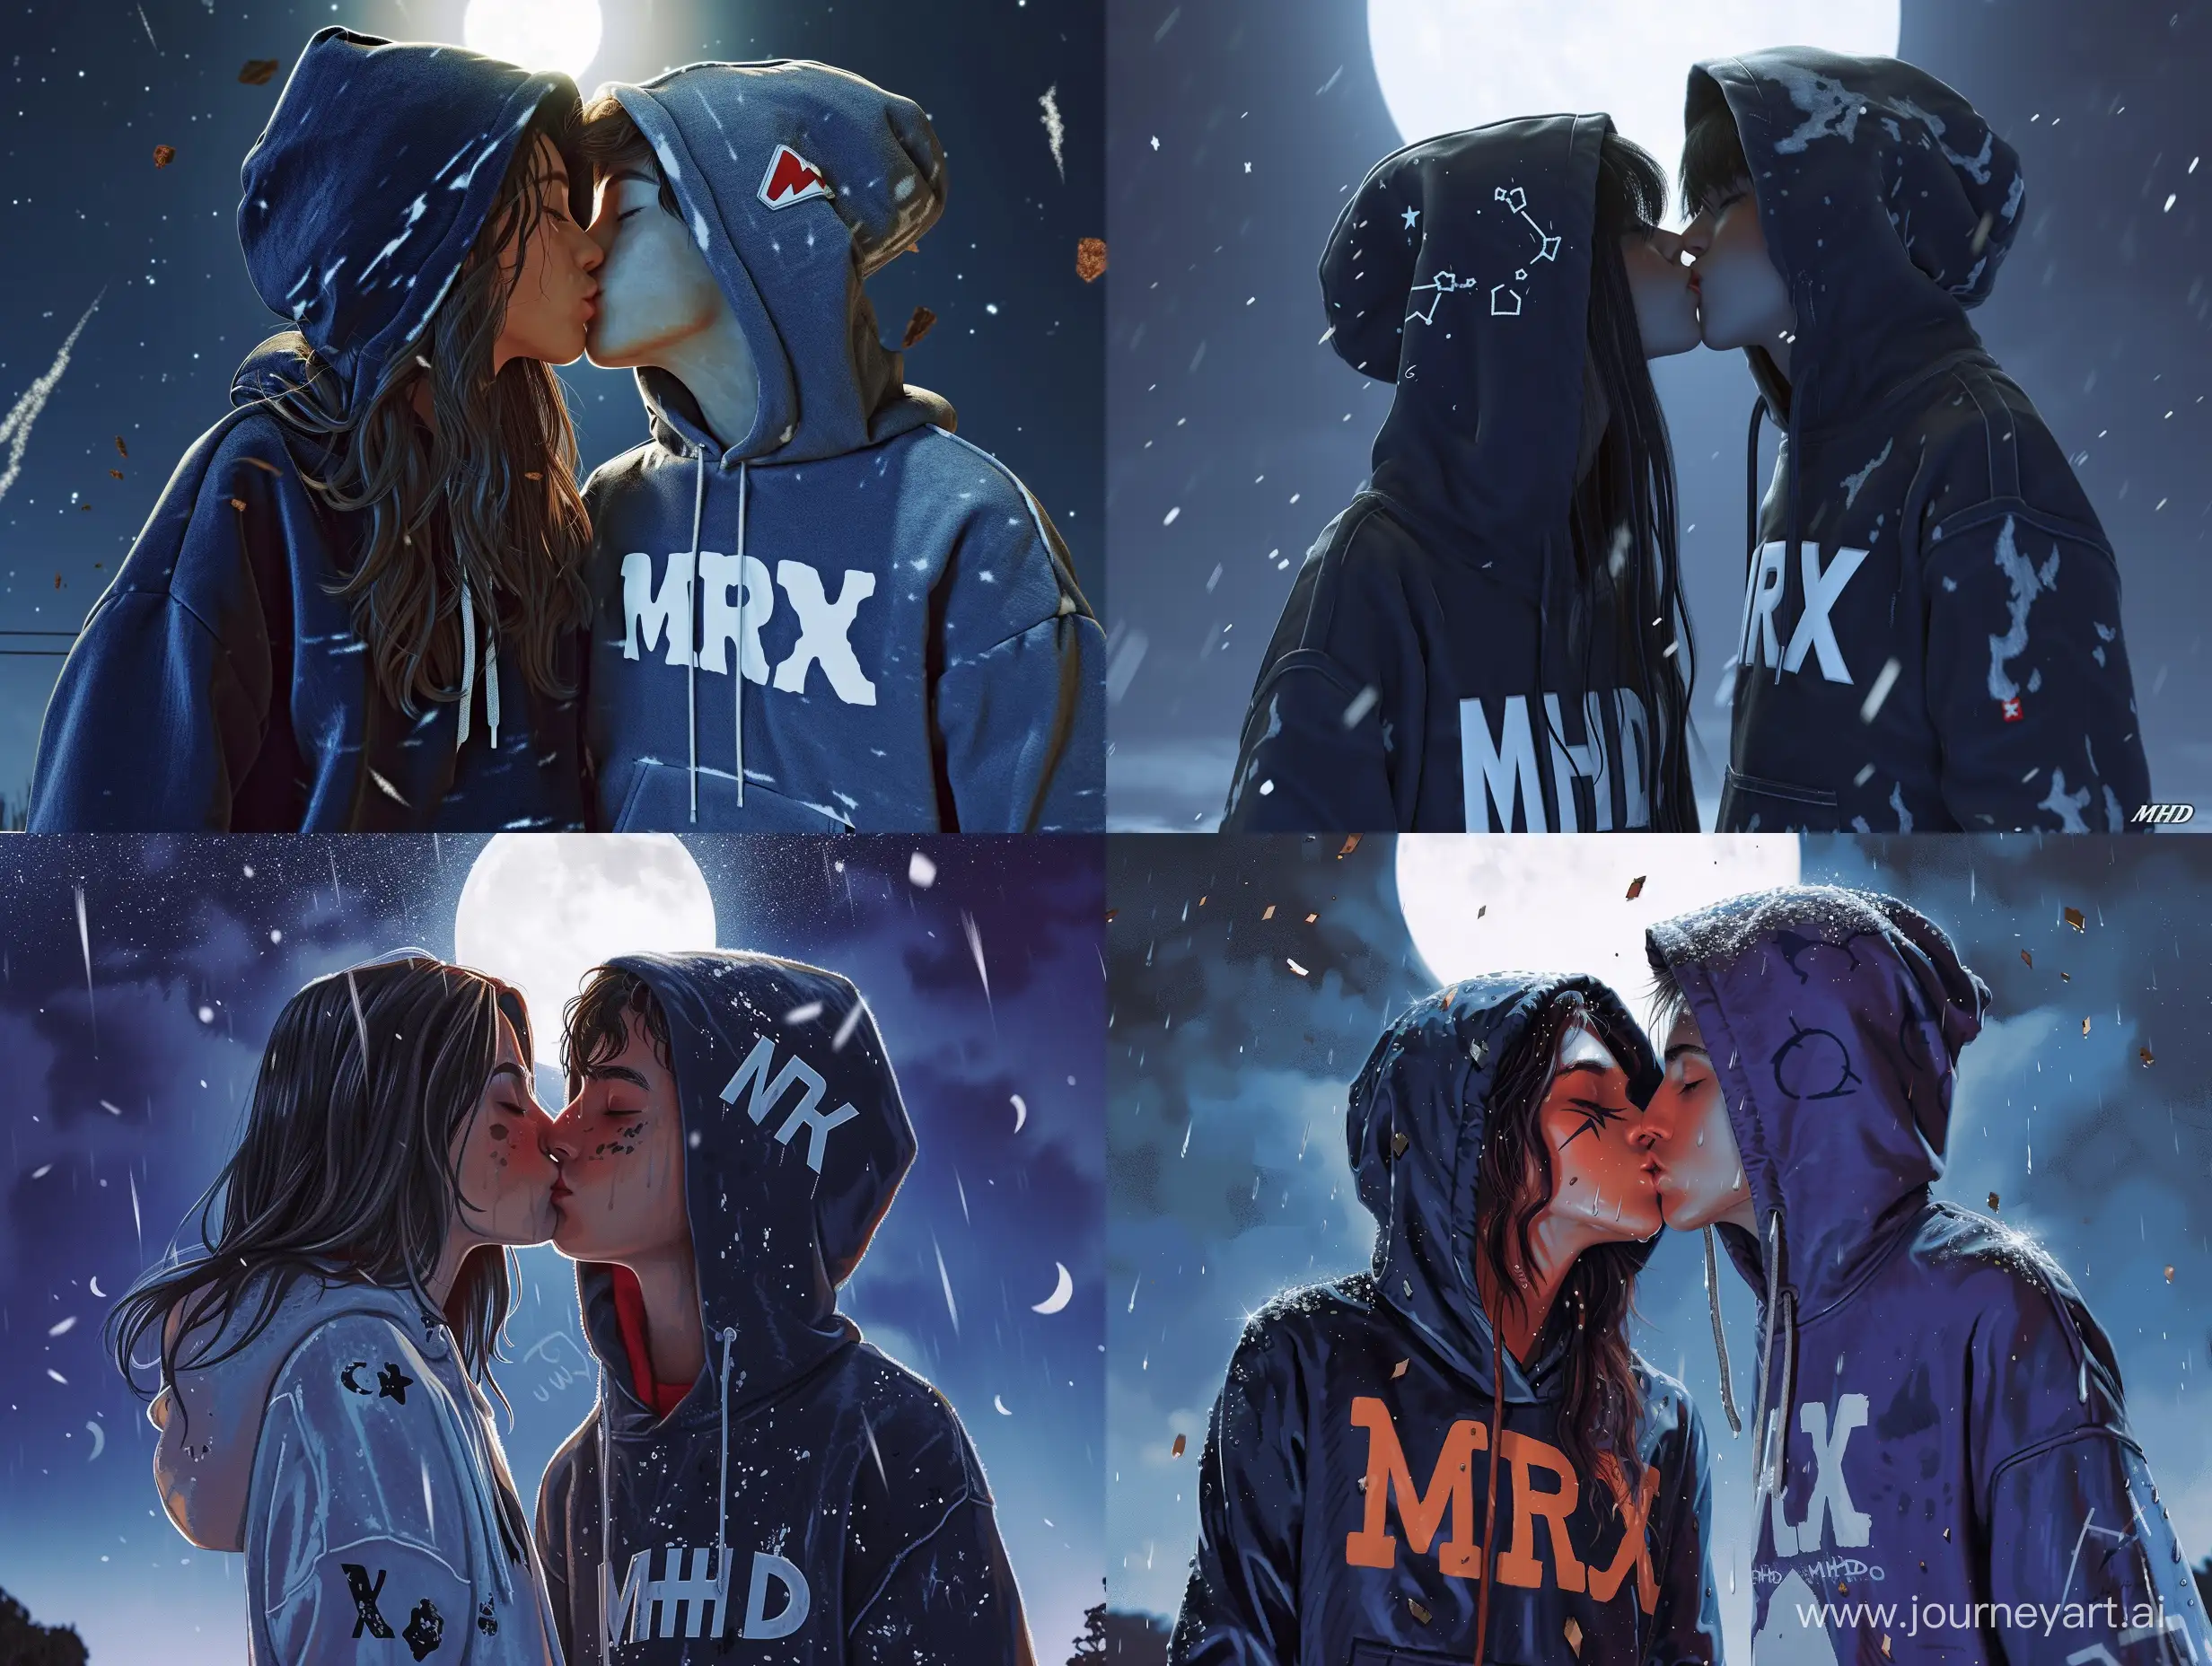 create a photo, girl has "MRX" letter on her hoody and boy has "MHD" letter on his hoody are kissing, night, moon, falling stars, ultra high detailed photo, modern, realistic, full body pose,